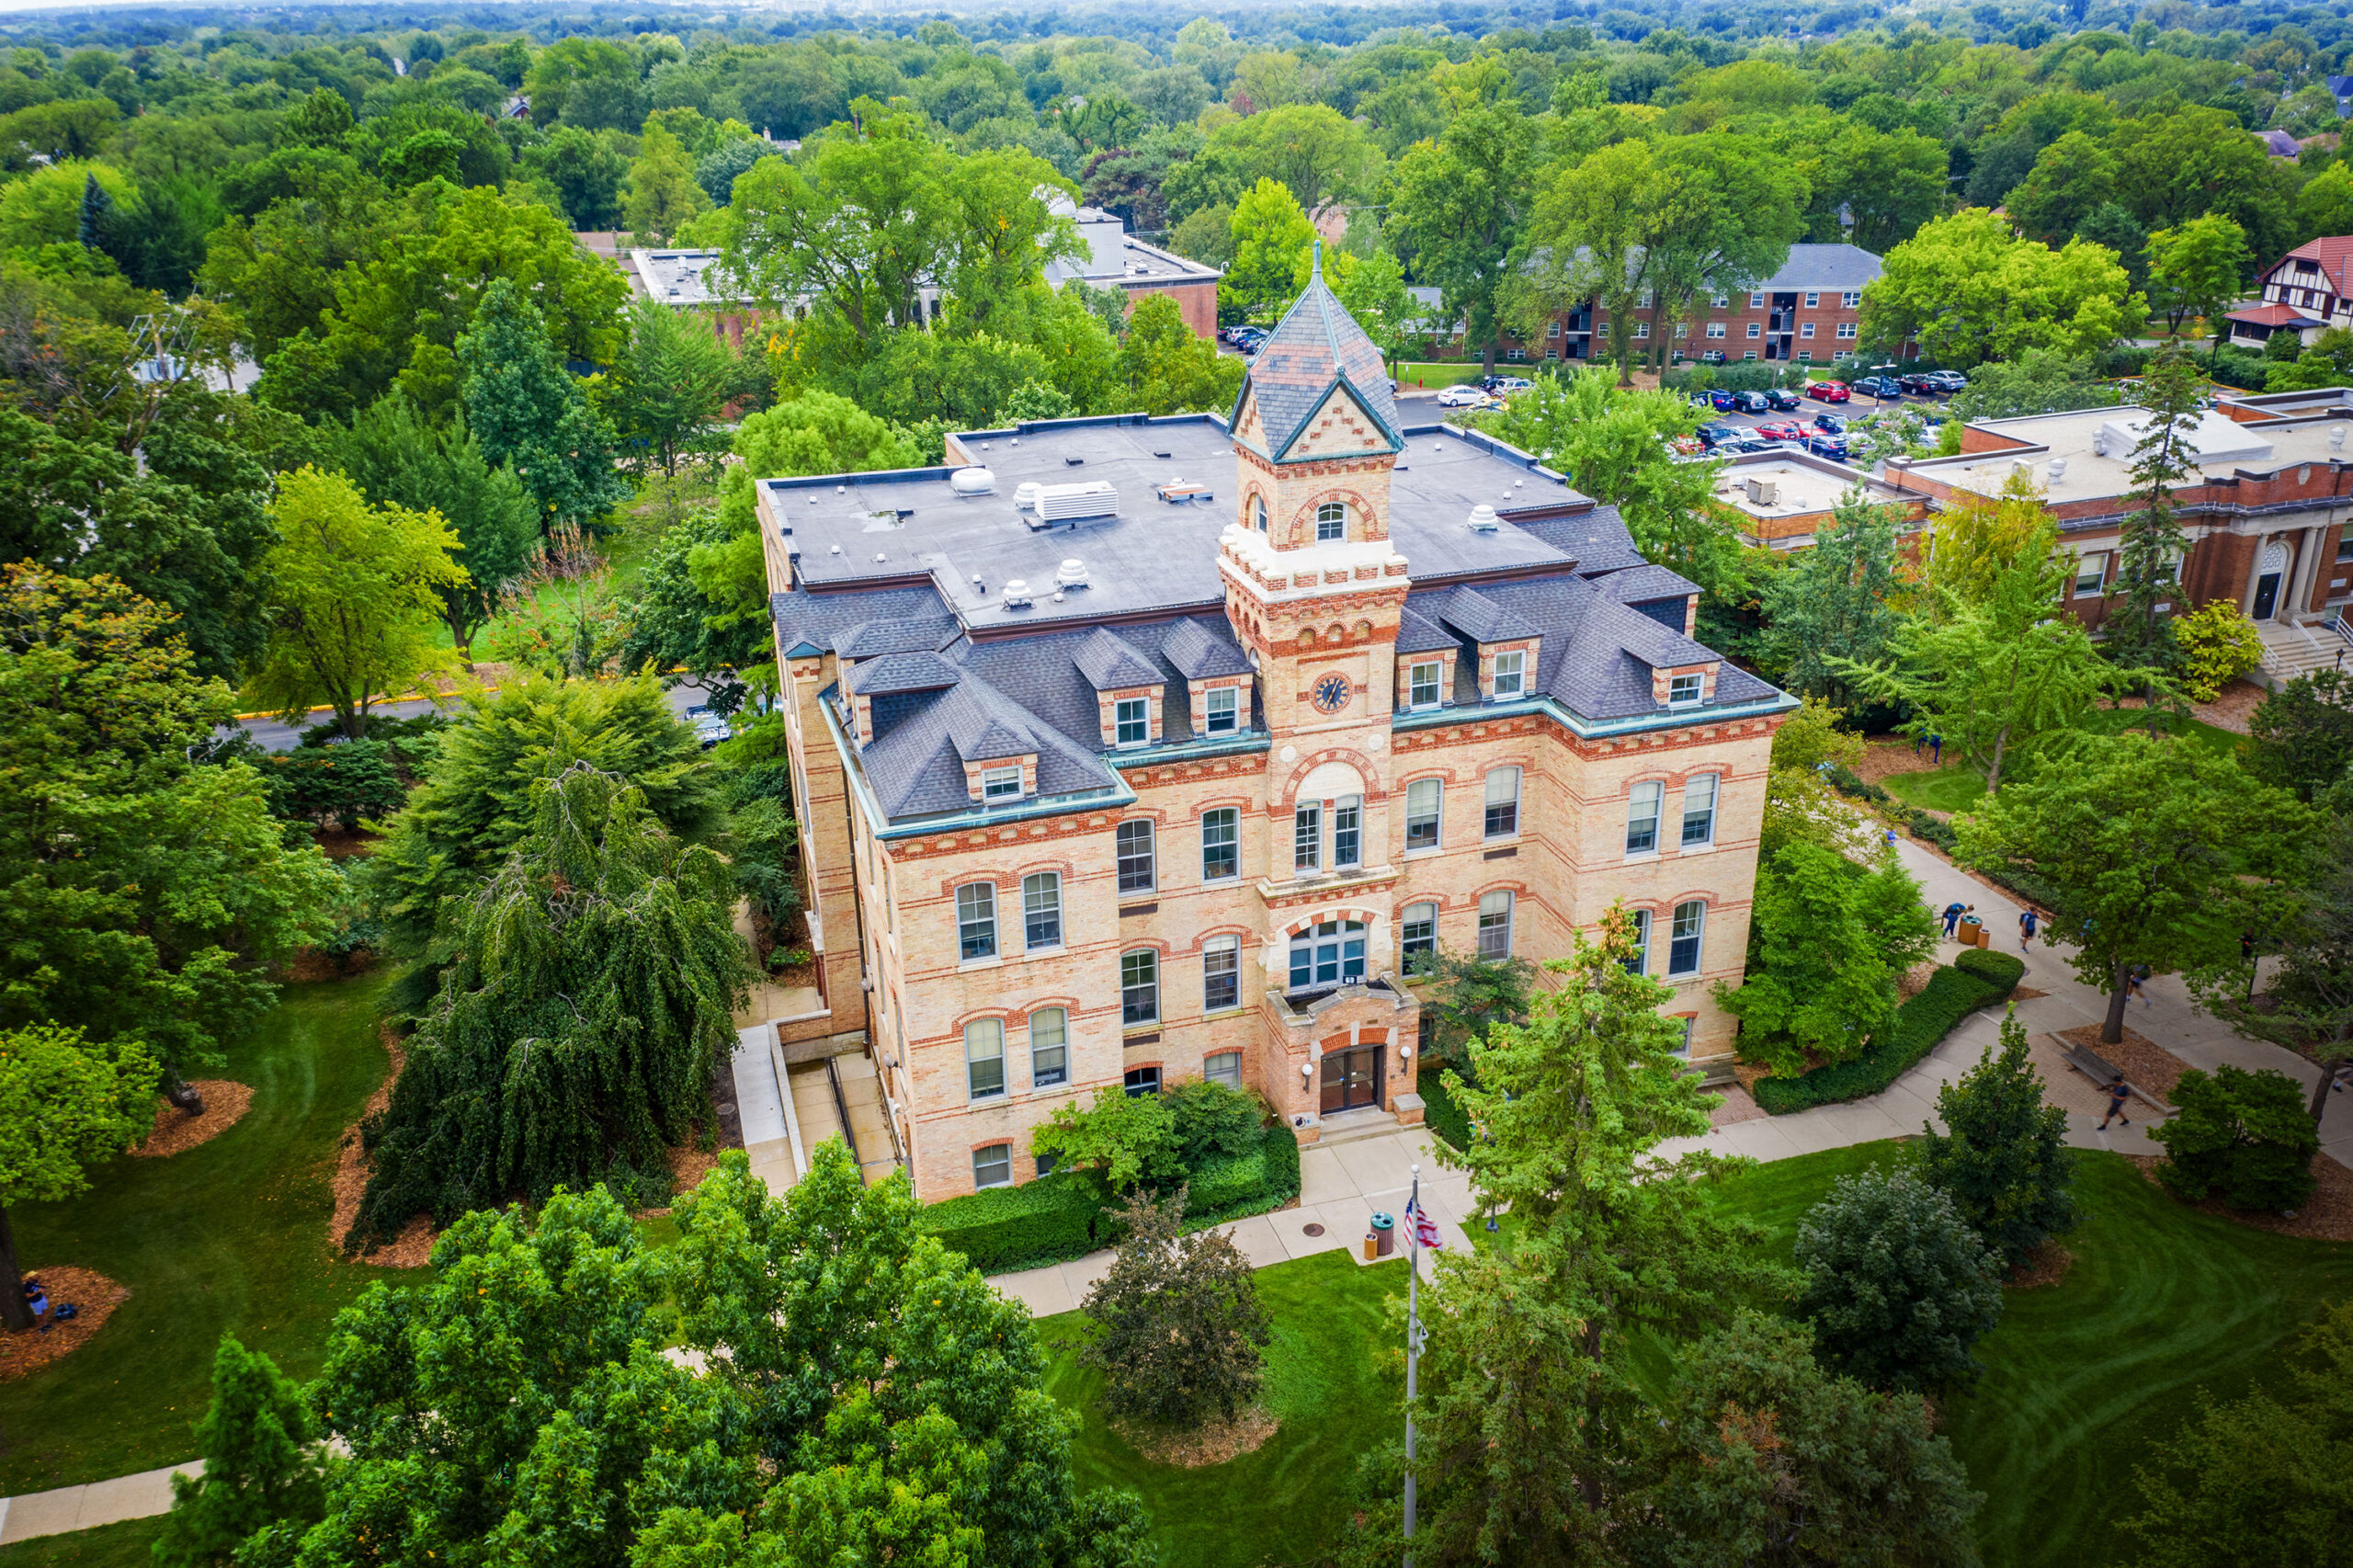 Aerial view of the front of the Old Main building on the campus of Elmhurst University in Elmhurst, IL.